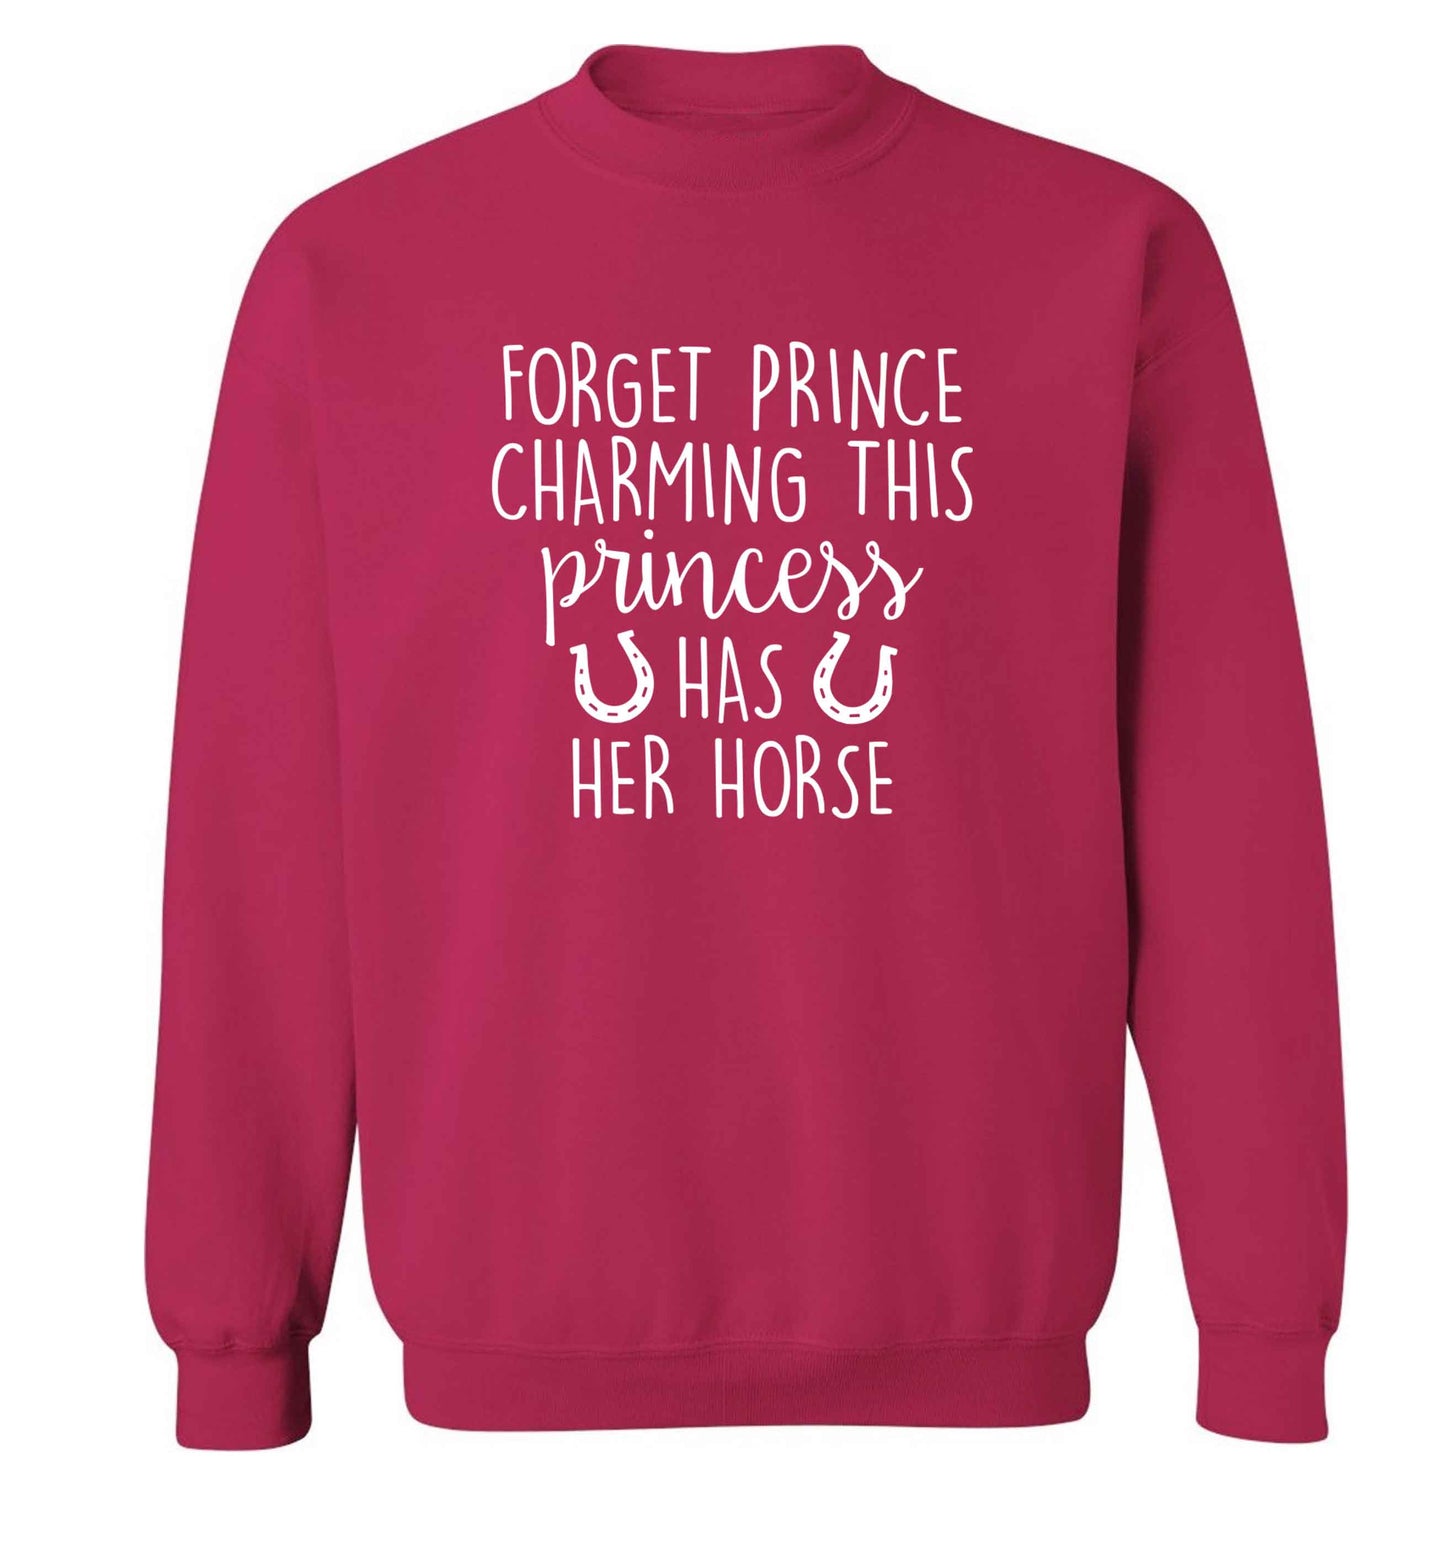 Forget prince charming this princess has her horse adult's unisex pink sweater 2XL